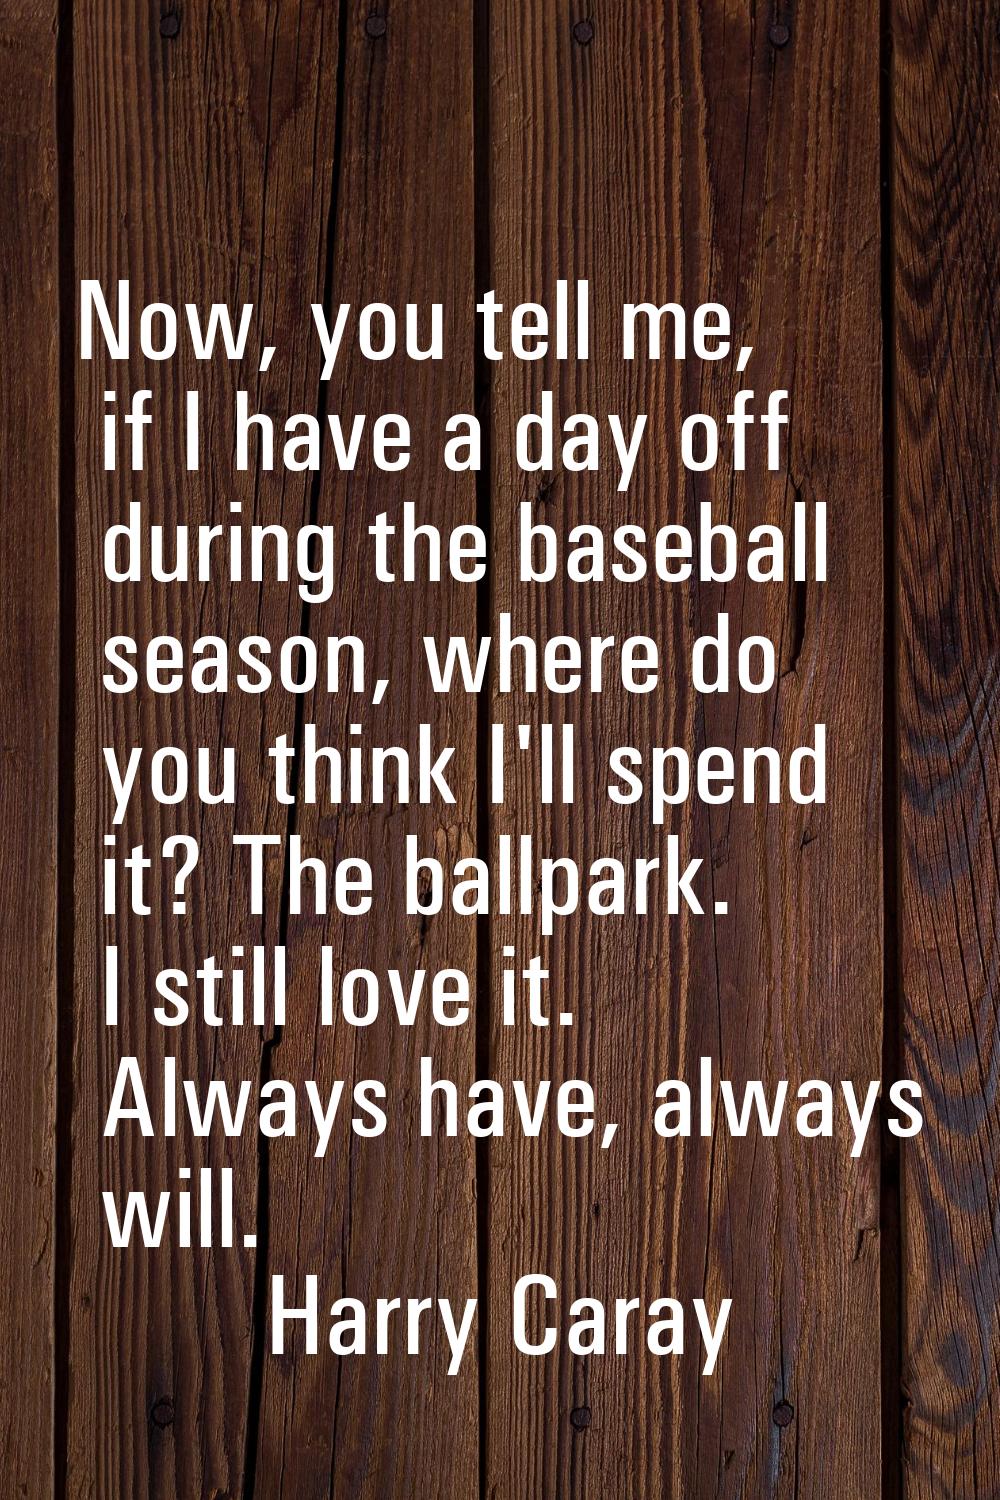 Now, you tell me, if I have a day off during the baseball season, where do you think I'll spend it?